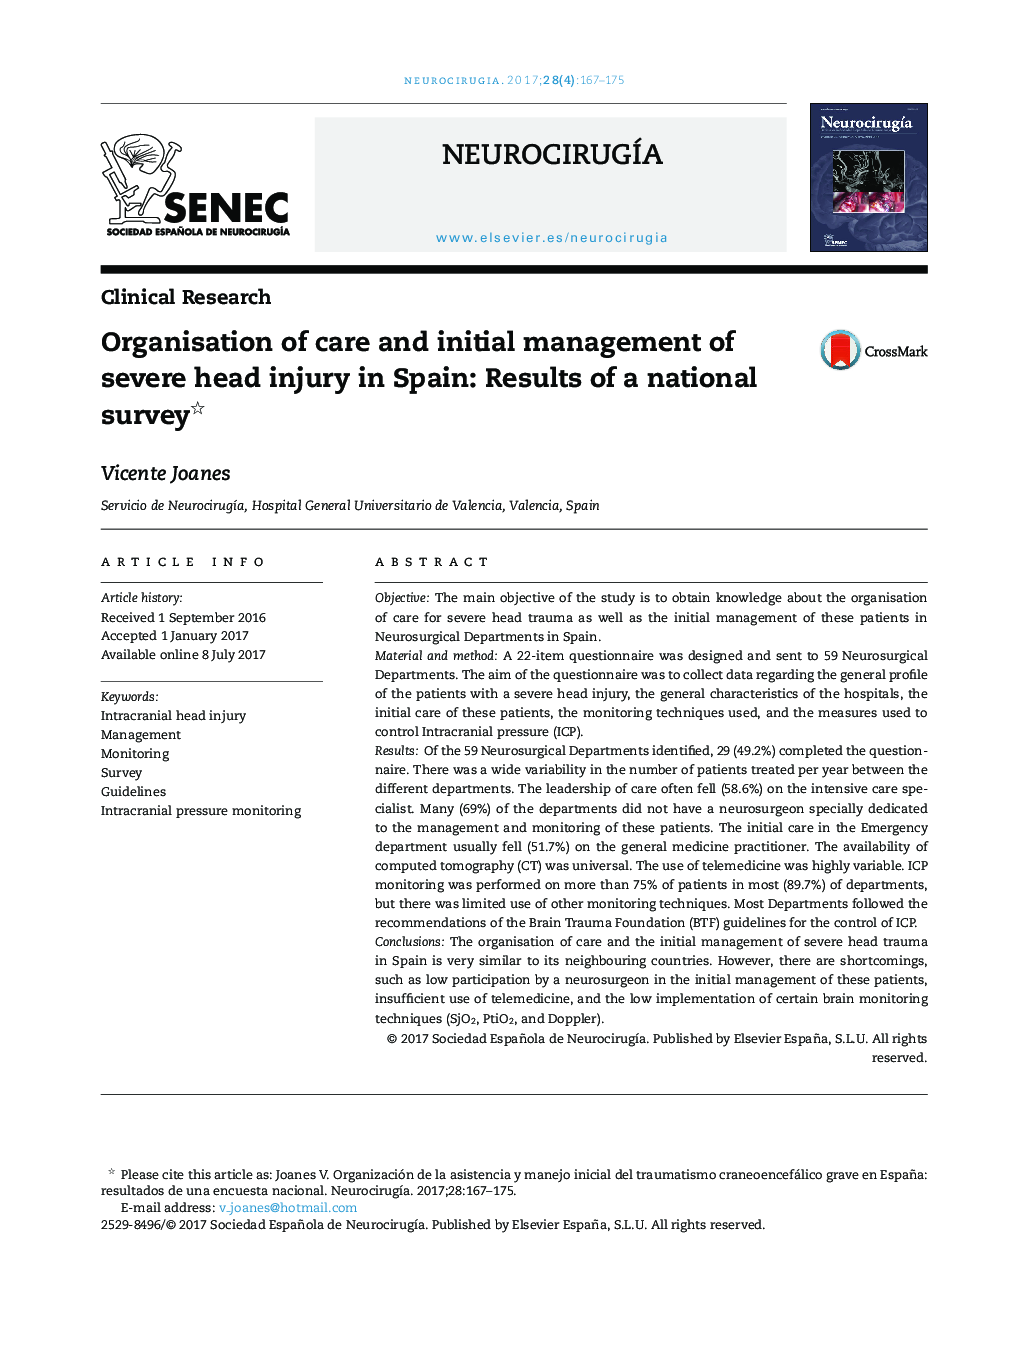 Organisation of care and initial management of severe head injury in Spain: Results of a national survey